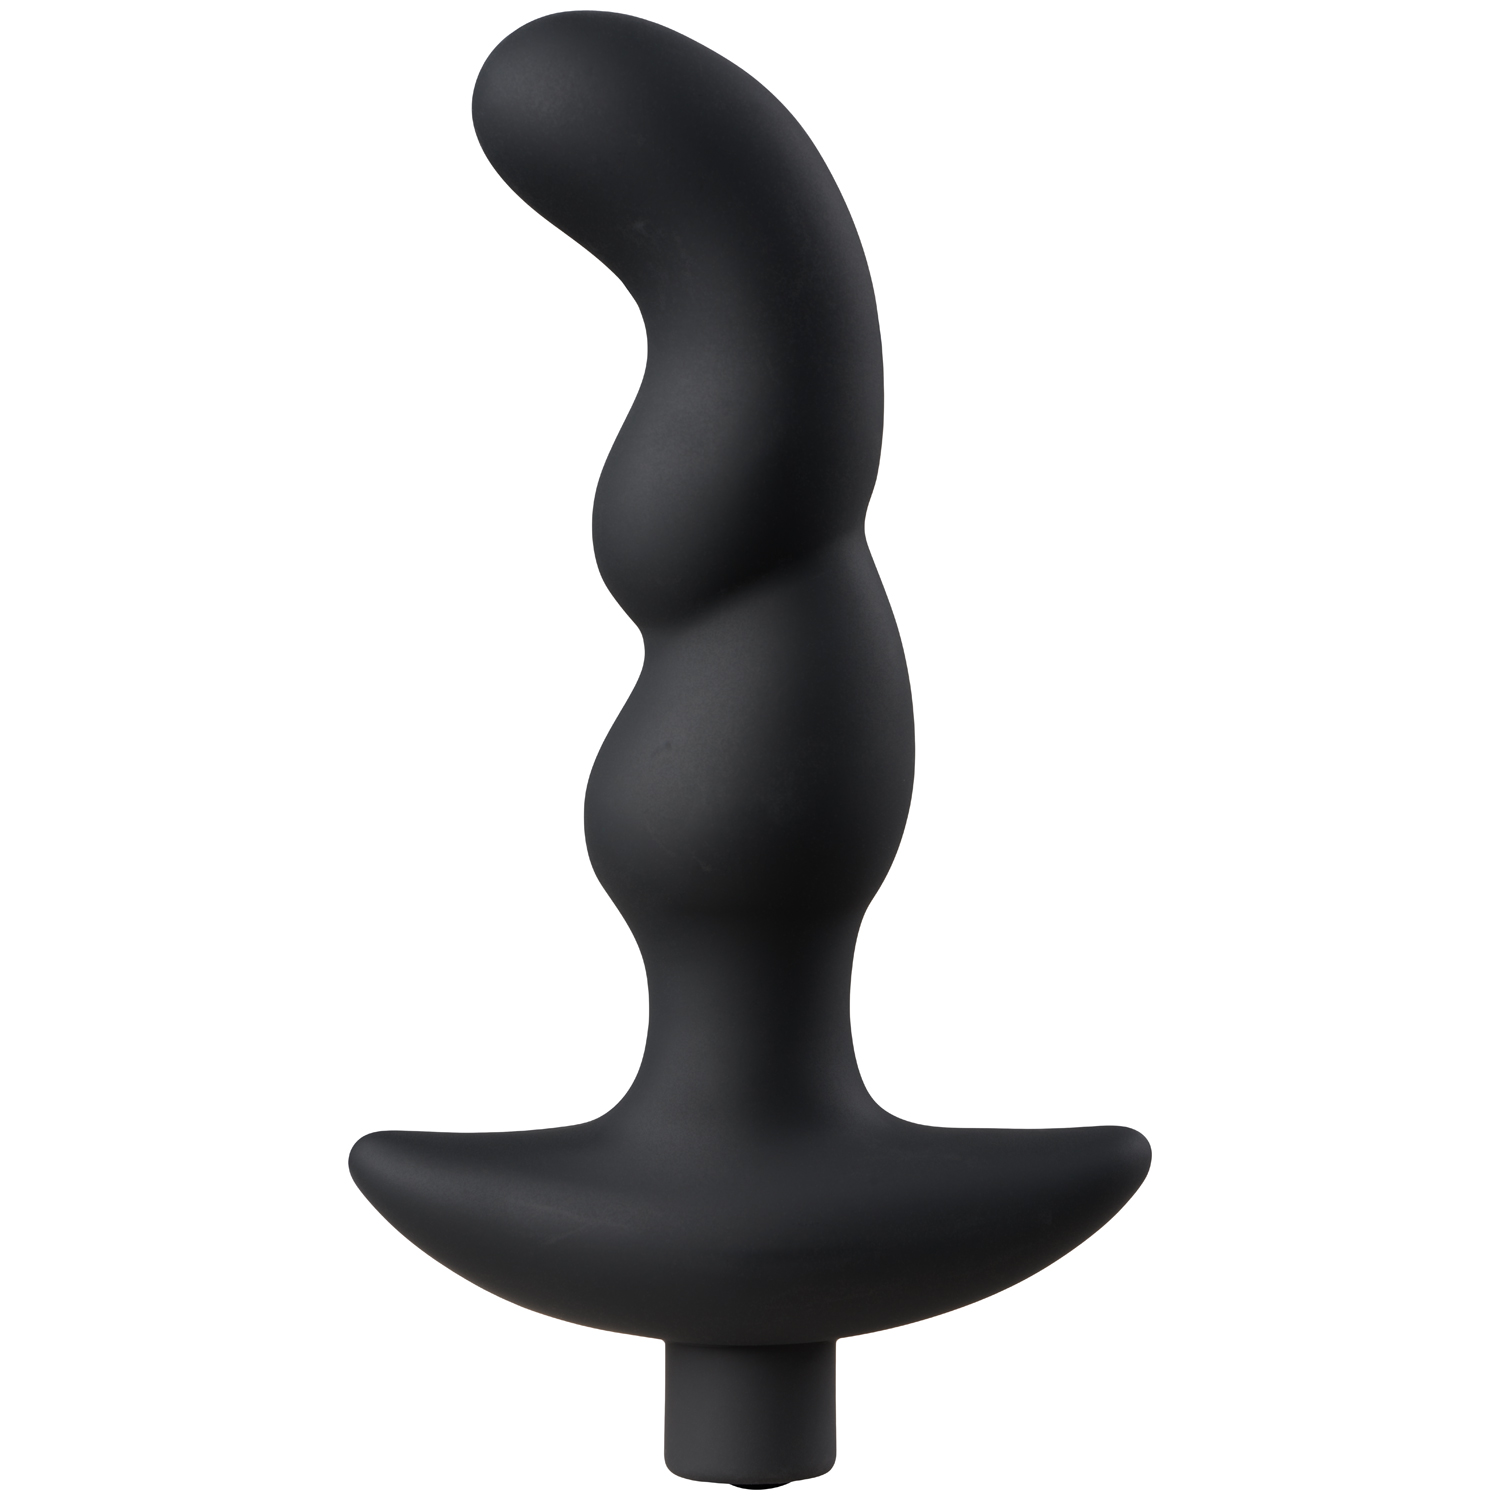 Sinful Rippled Rechargeable Prostate Vibrator | REA för Män//REA för Män//REA//Fetish//Fetish Sexleksaker//Sinful//REA Fetish//Anala sexleksaker//Sinful för Män//Sinful Analsexleksaker//Prostata Milker//Han | Intimast